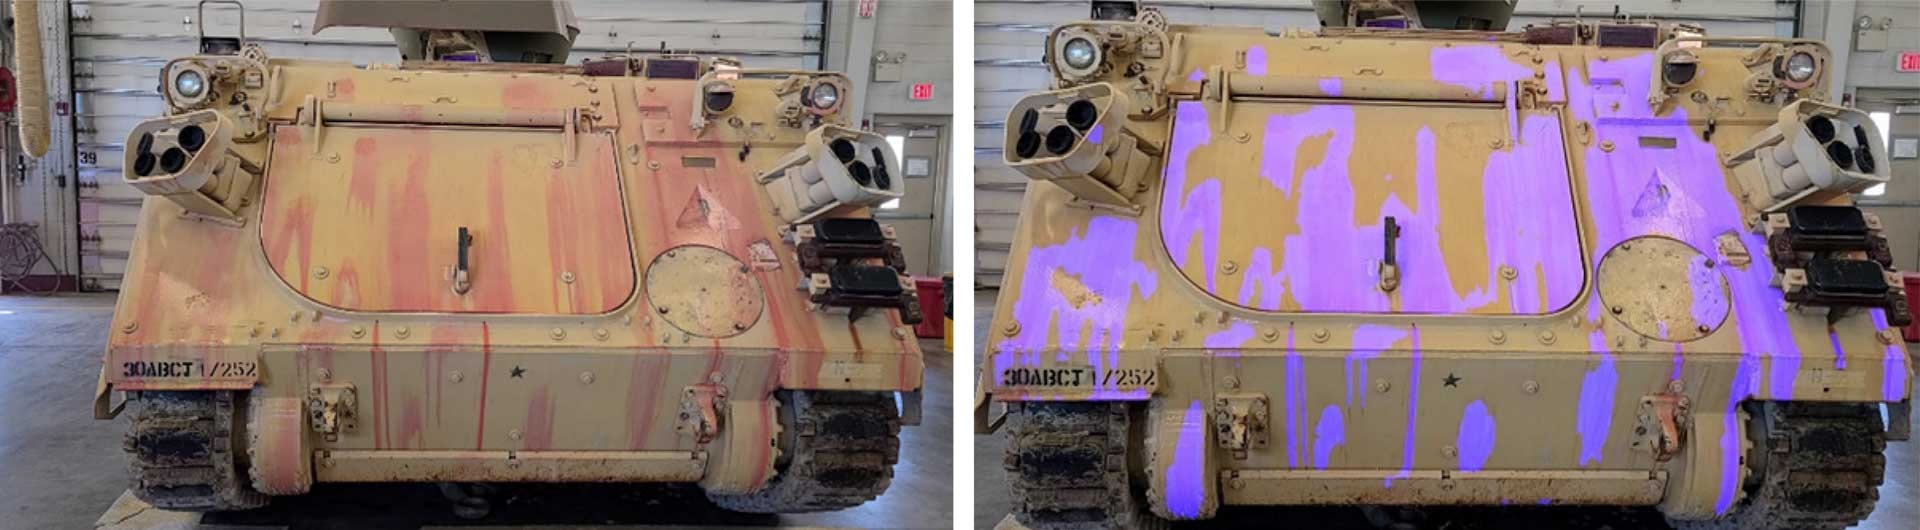 CIDAS mapped chemical agent contamination on an M113 armored personnel carrier.